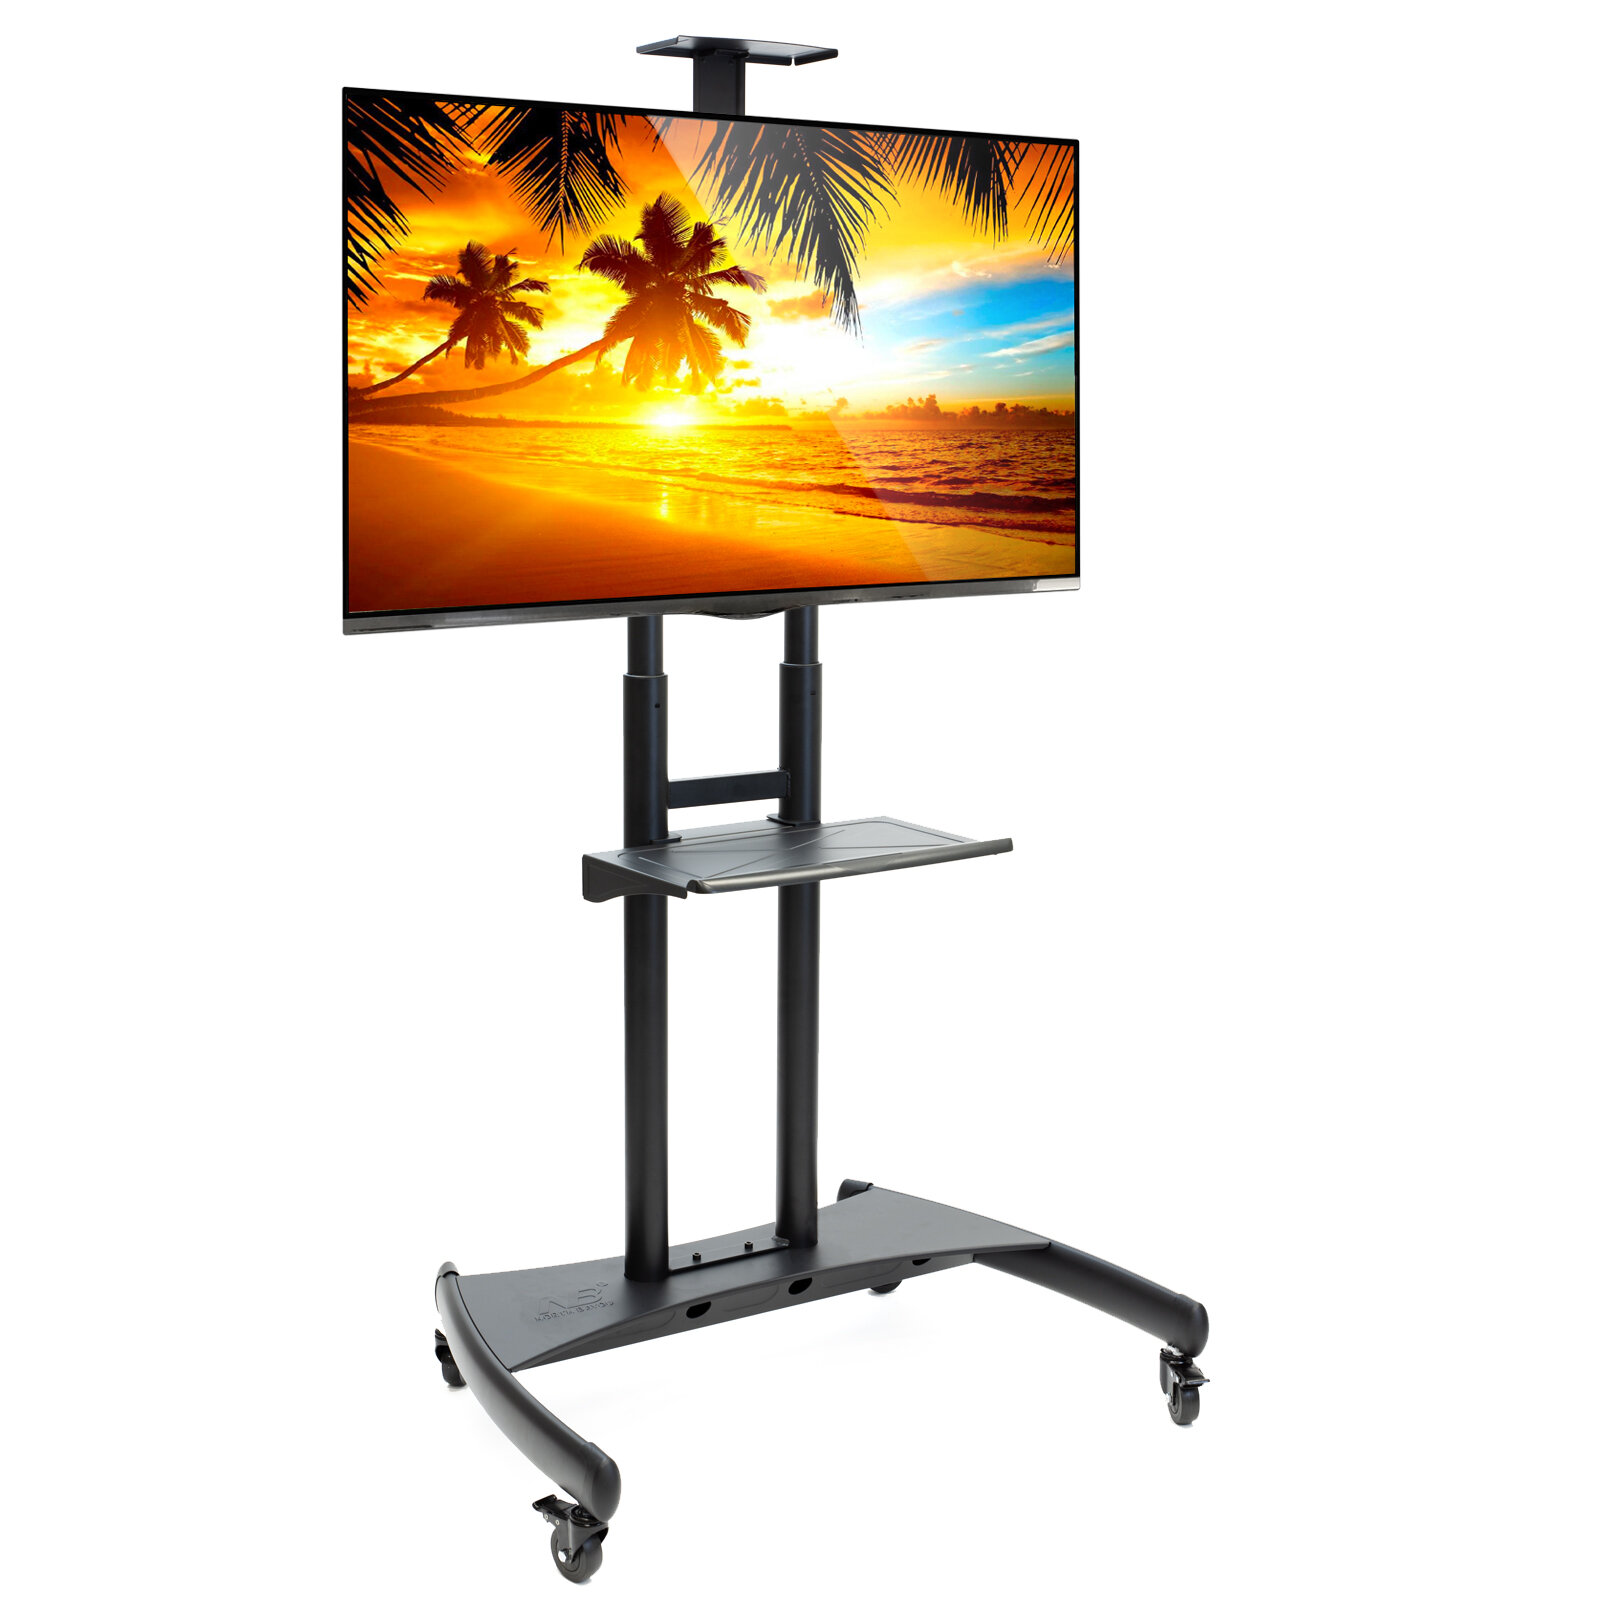 50%22+LCD+Monitor+w_+Stand.jpg